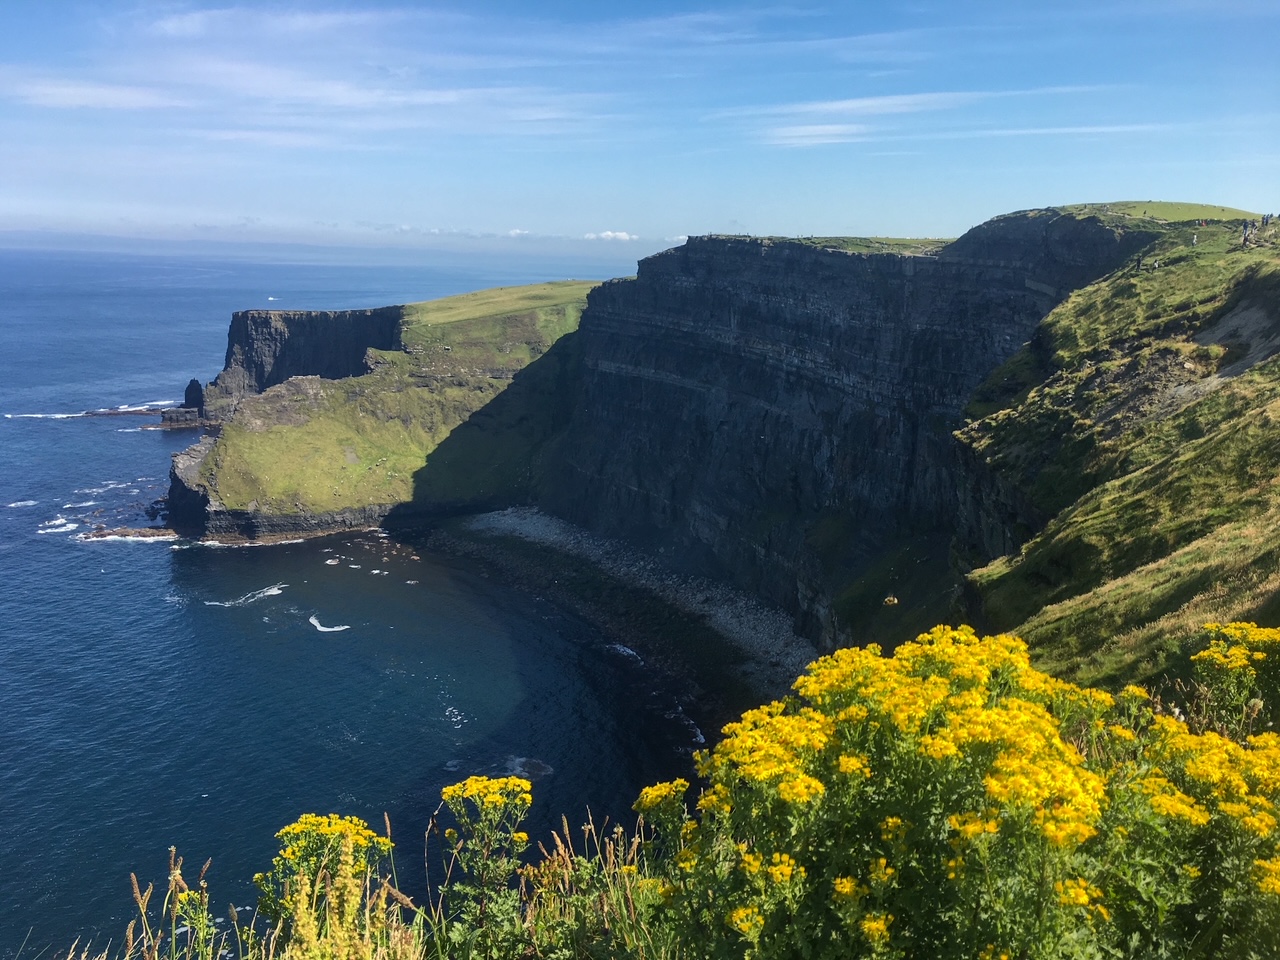 another view from the Cliffs of Moher